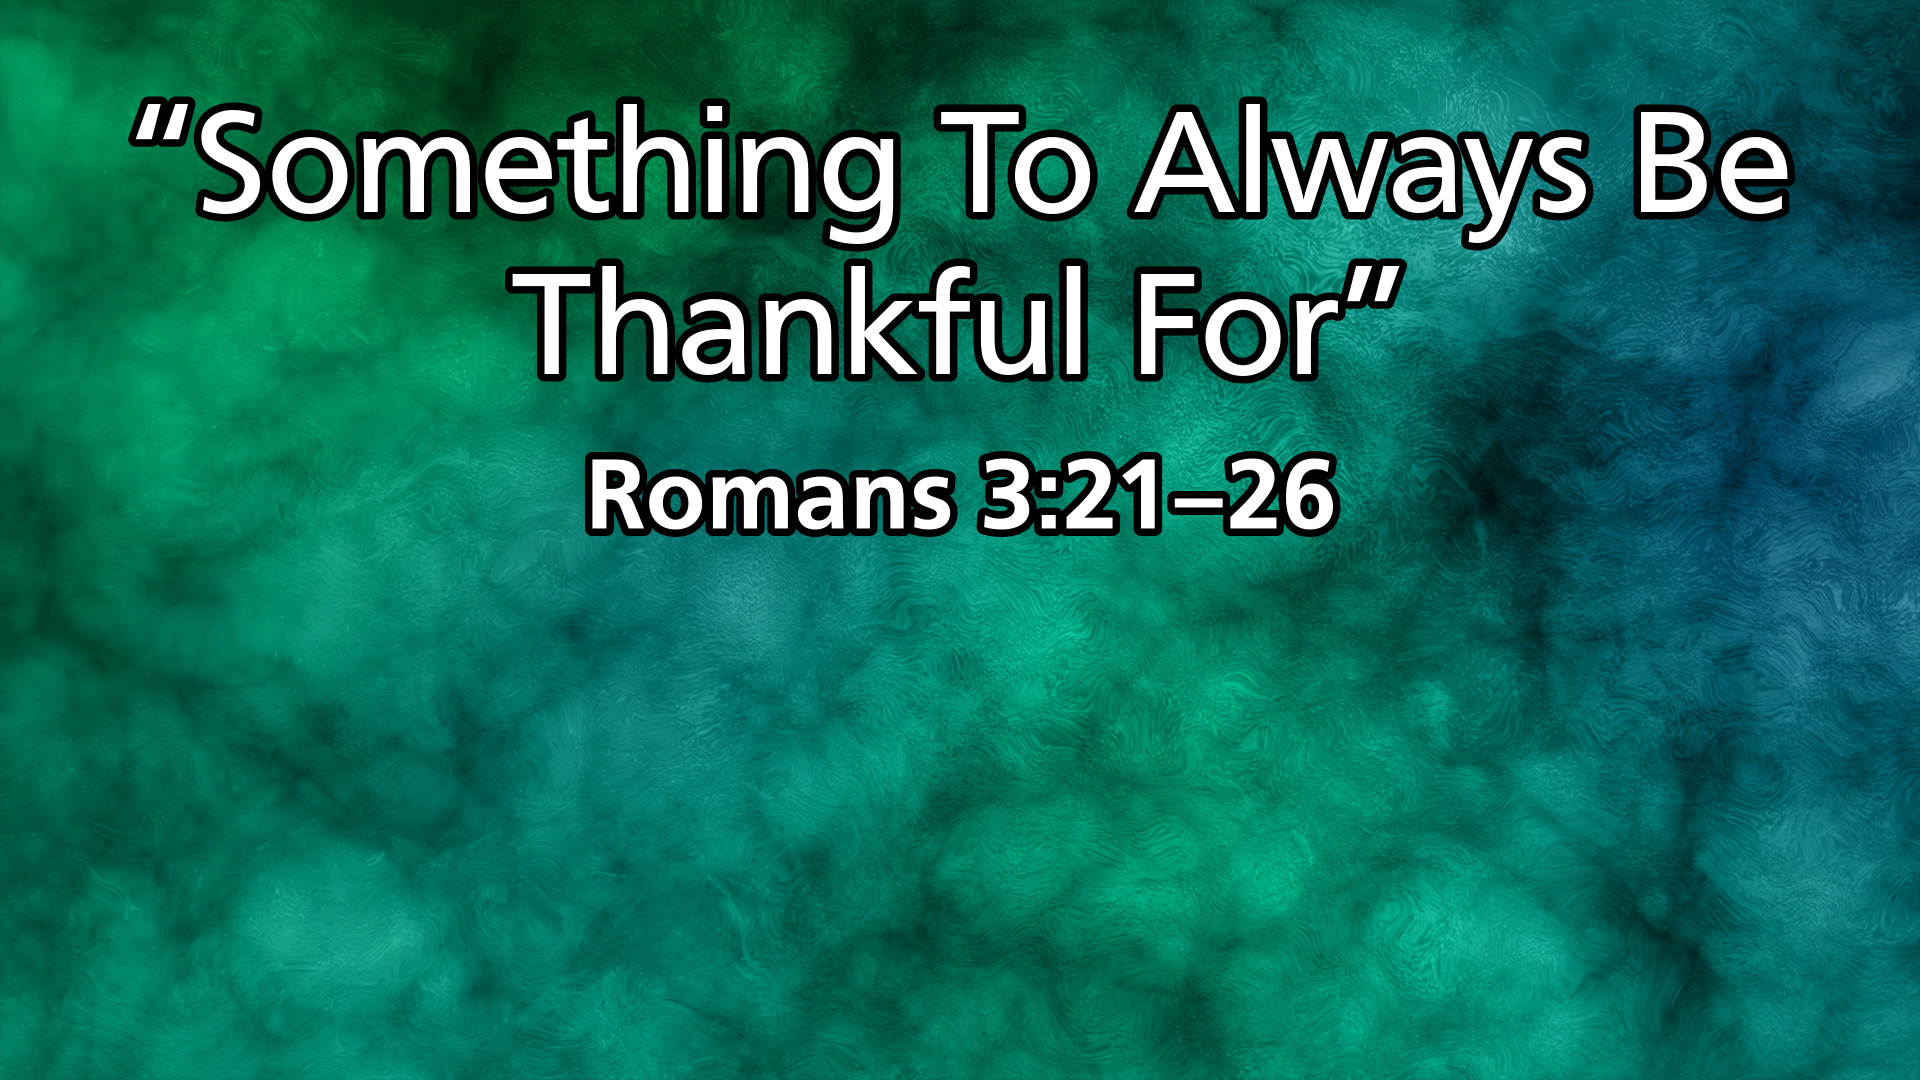 “Something To Always Be Thankful For”